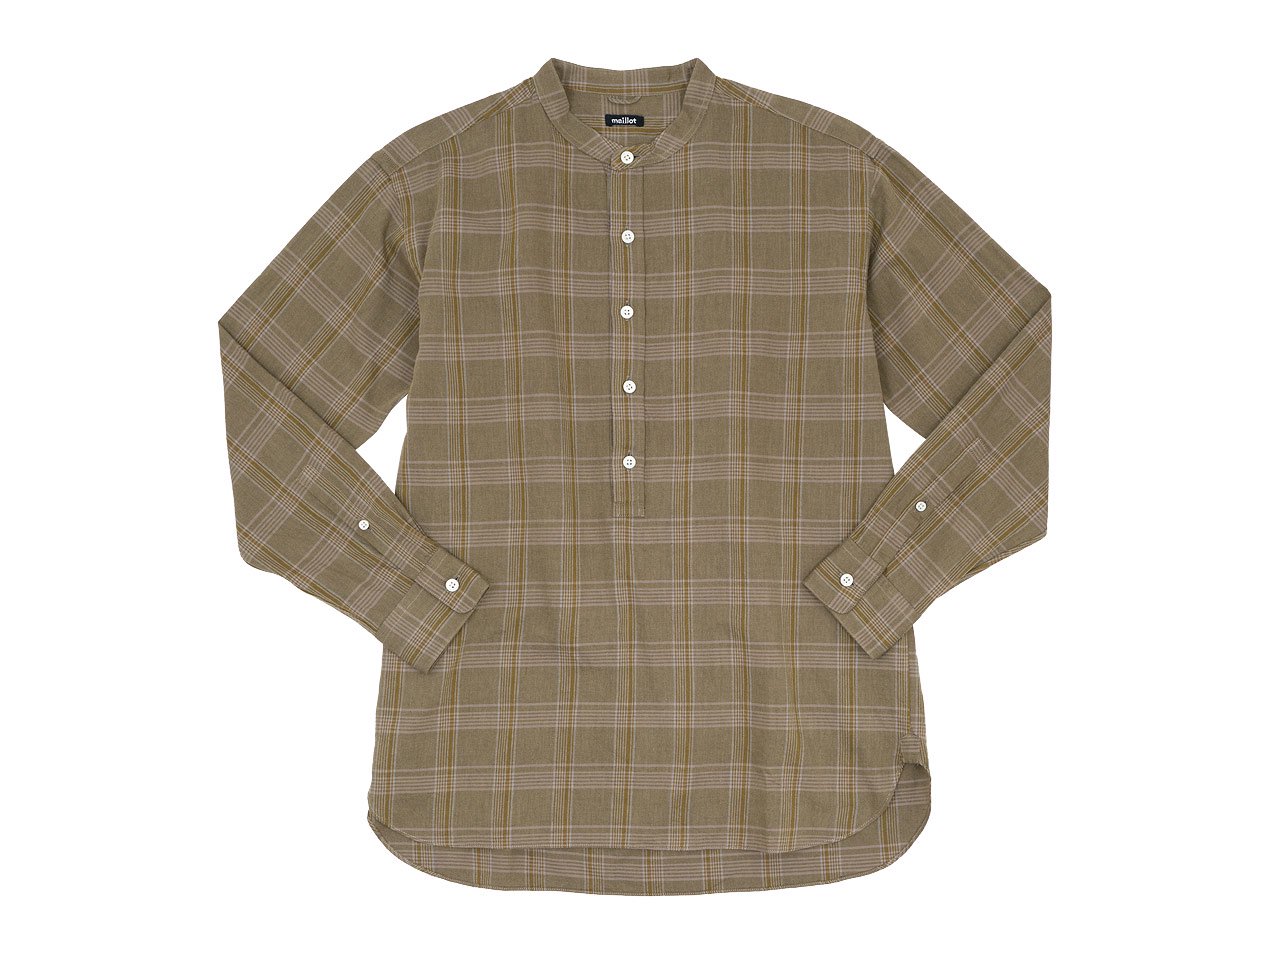 maillot mature twill check pull over stand shirts BROWN